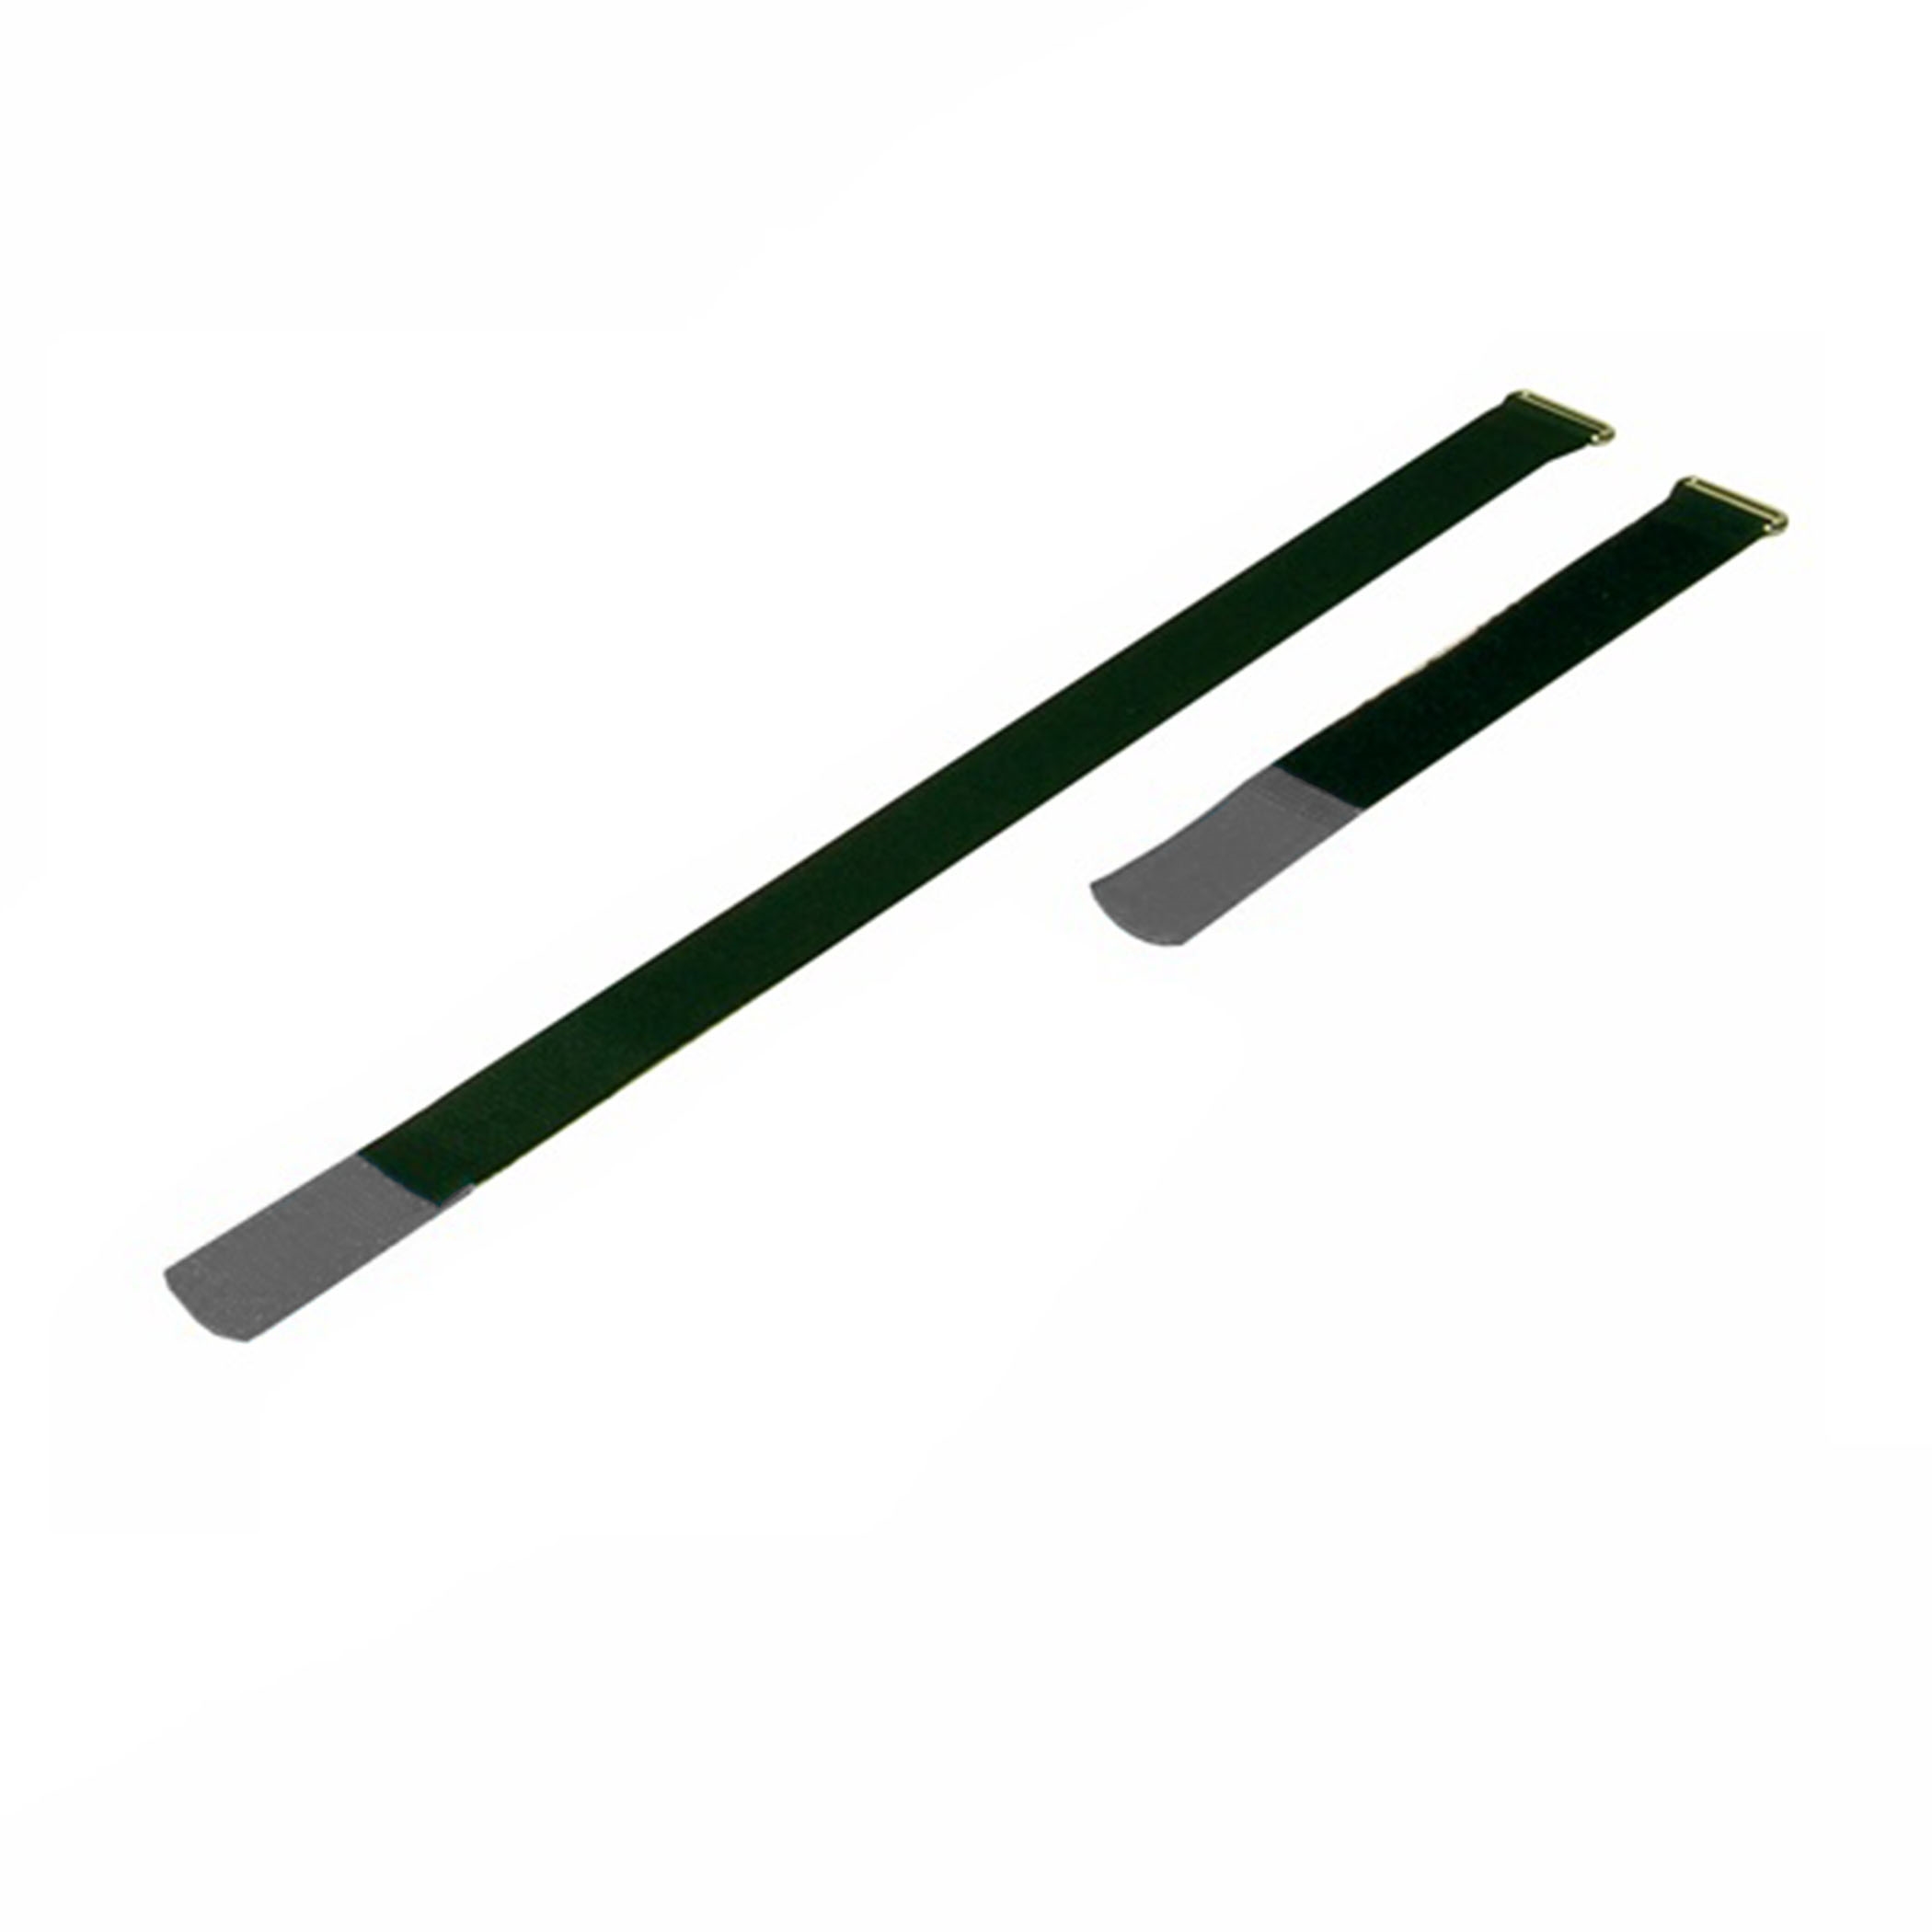 Cable Tie 410x25mm with Hook Gray, (10 pieces) - a2541-520h